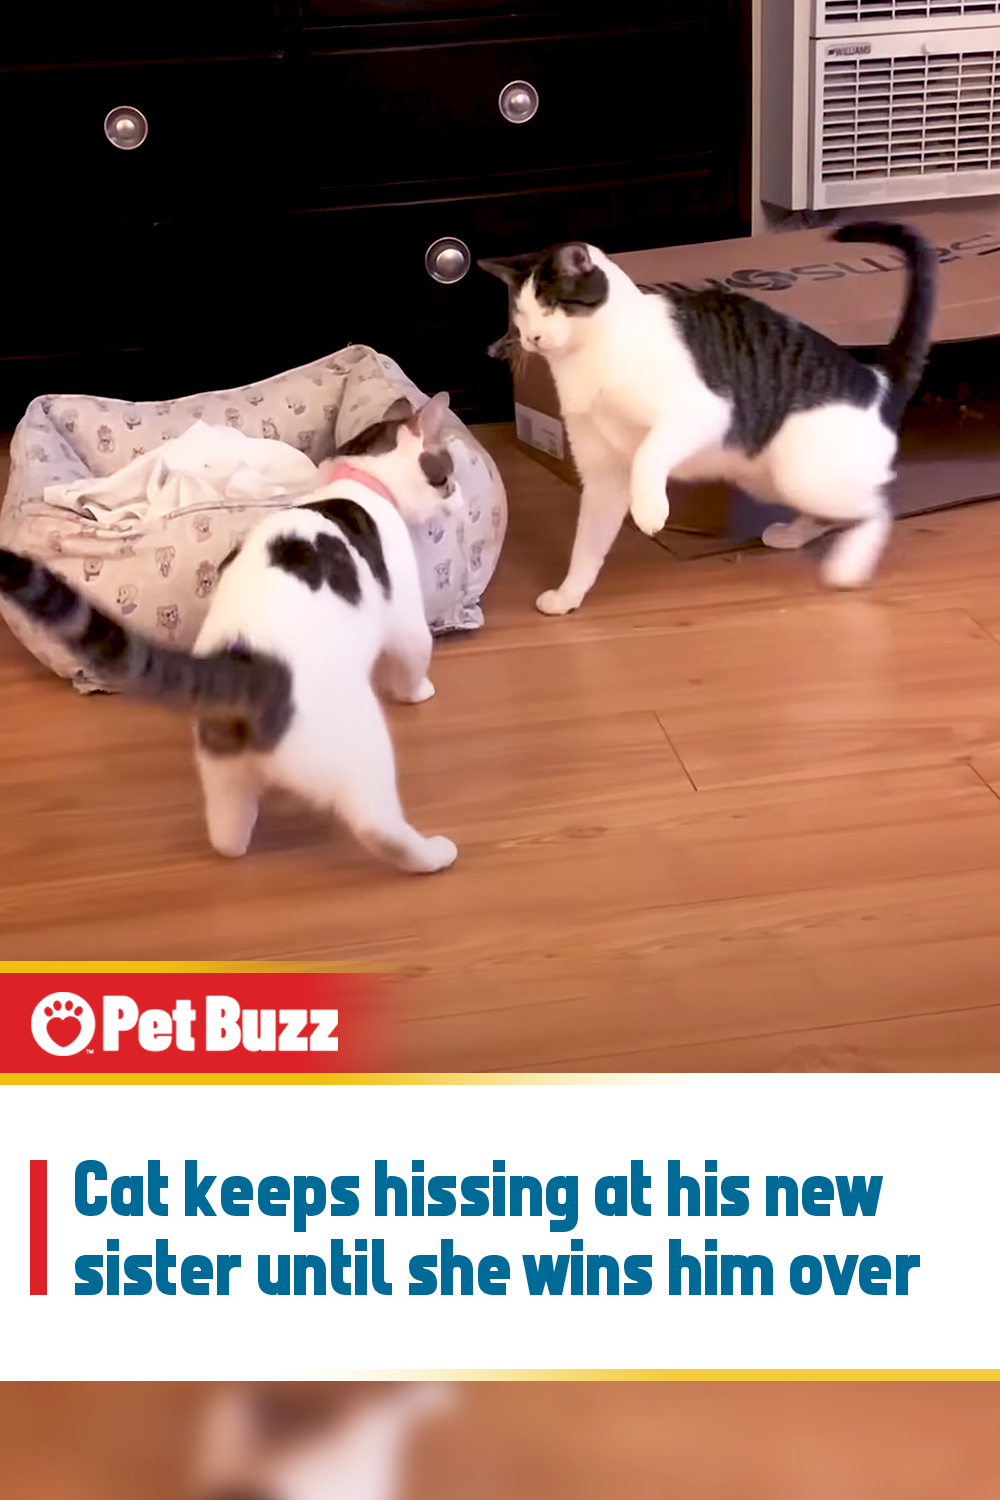 Cat keeps hissing at his new sister until she wins him over